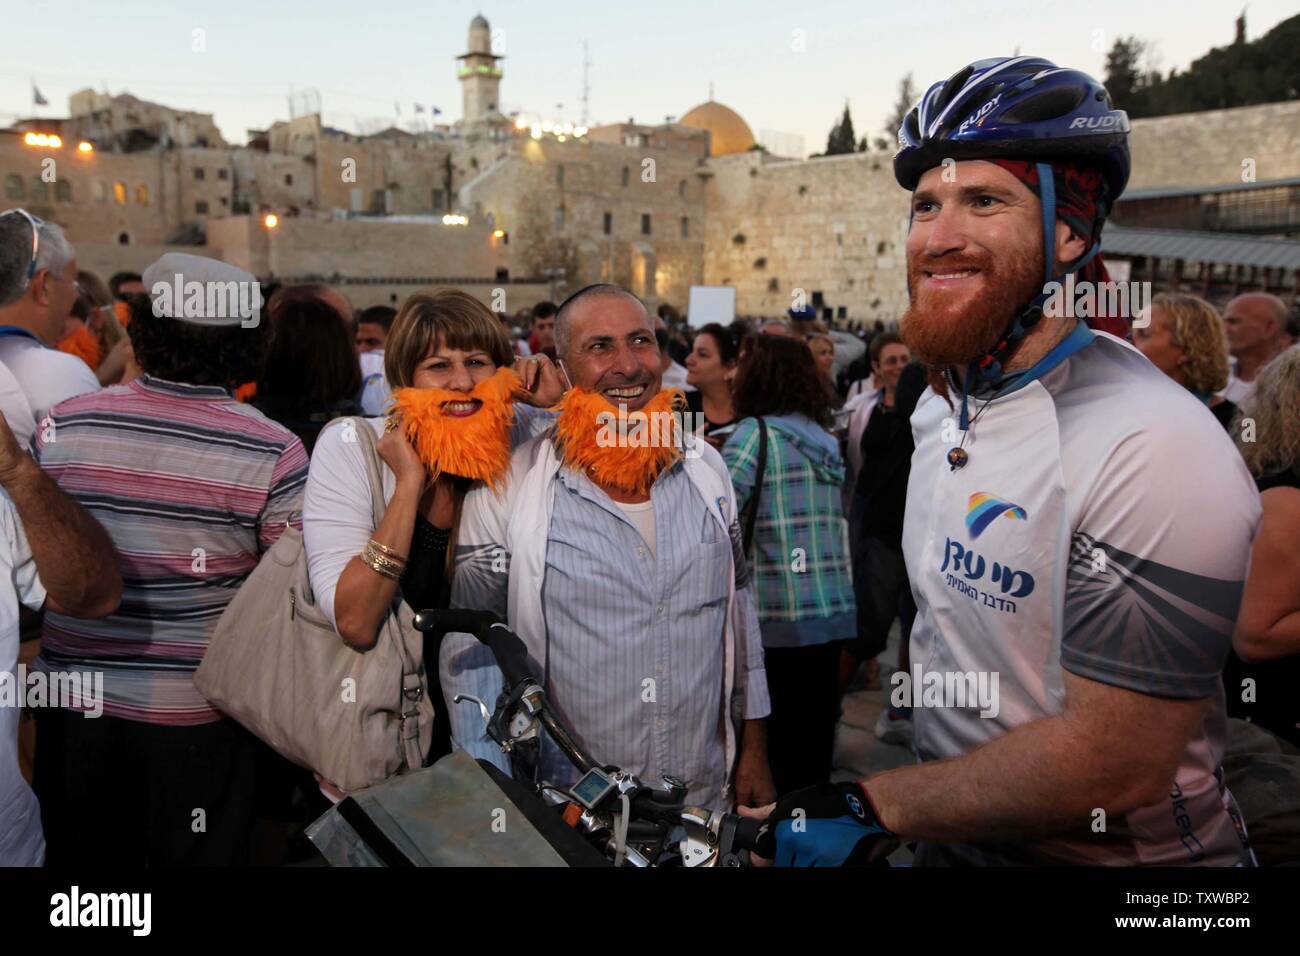 Israeli Roi Sadan completes his around the world trip on his bicycle at the Western Wall in Jerusalem on September 15, 2011.  It took more than four years to cycle through 42 countries and 66,000 km (42,000 Mile).  He nicknamed his bicycle 'Emuna' (faith) and said he was acting as a messenger of brotherhood and peace for the entire world.  UPI Stock Photo